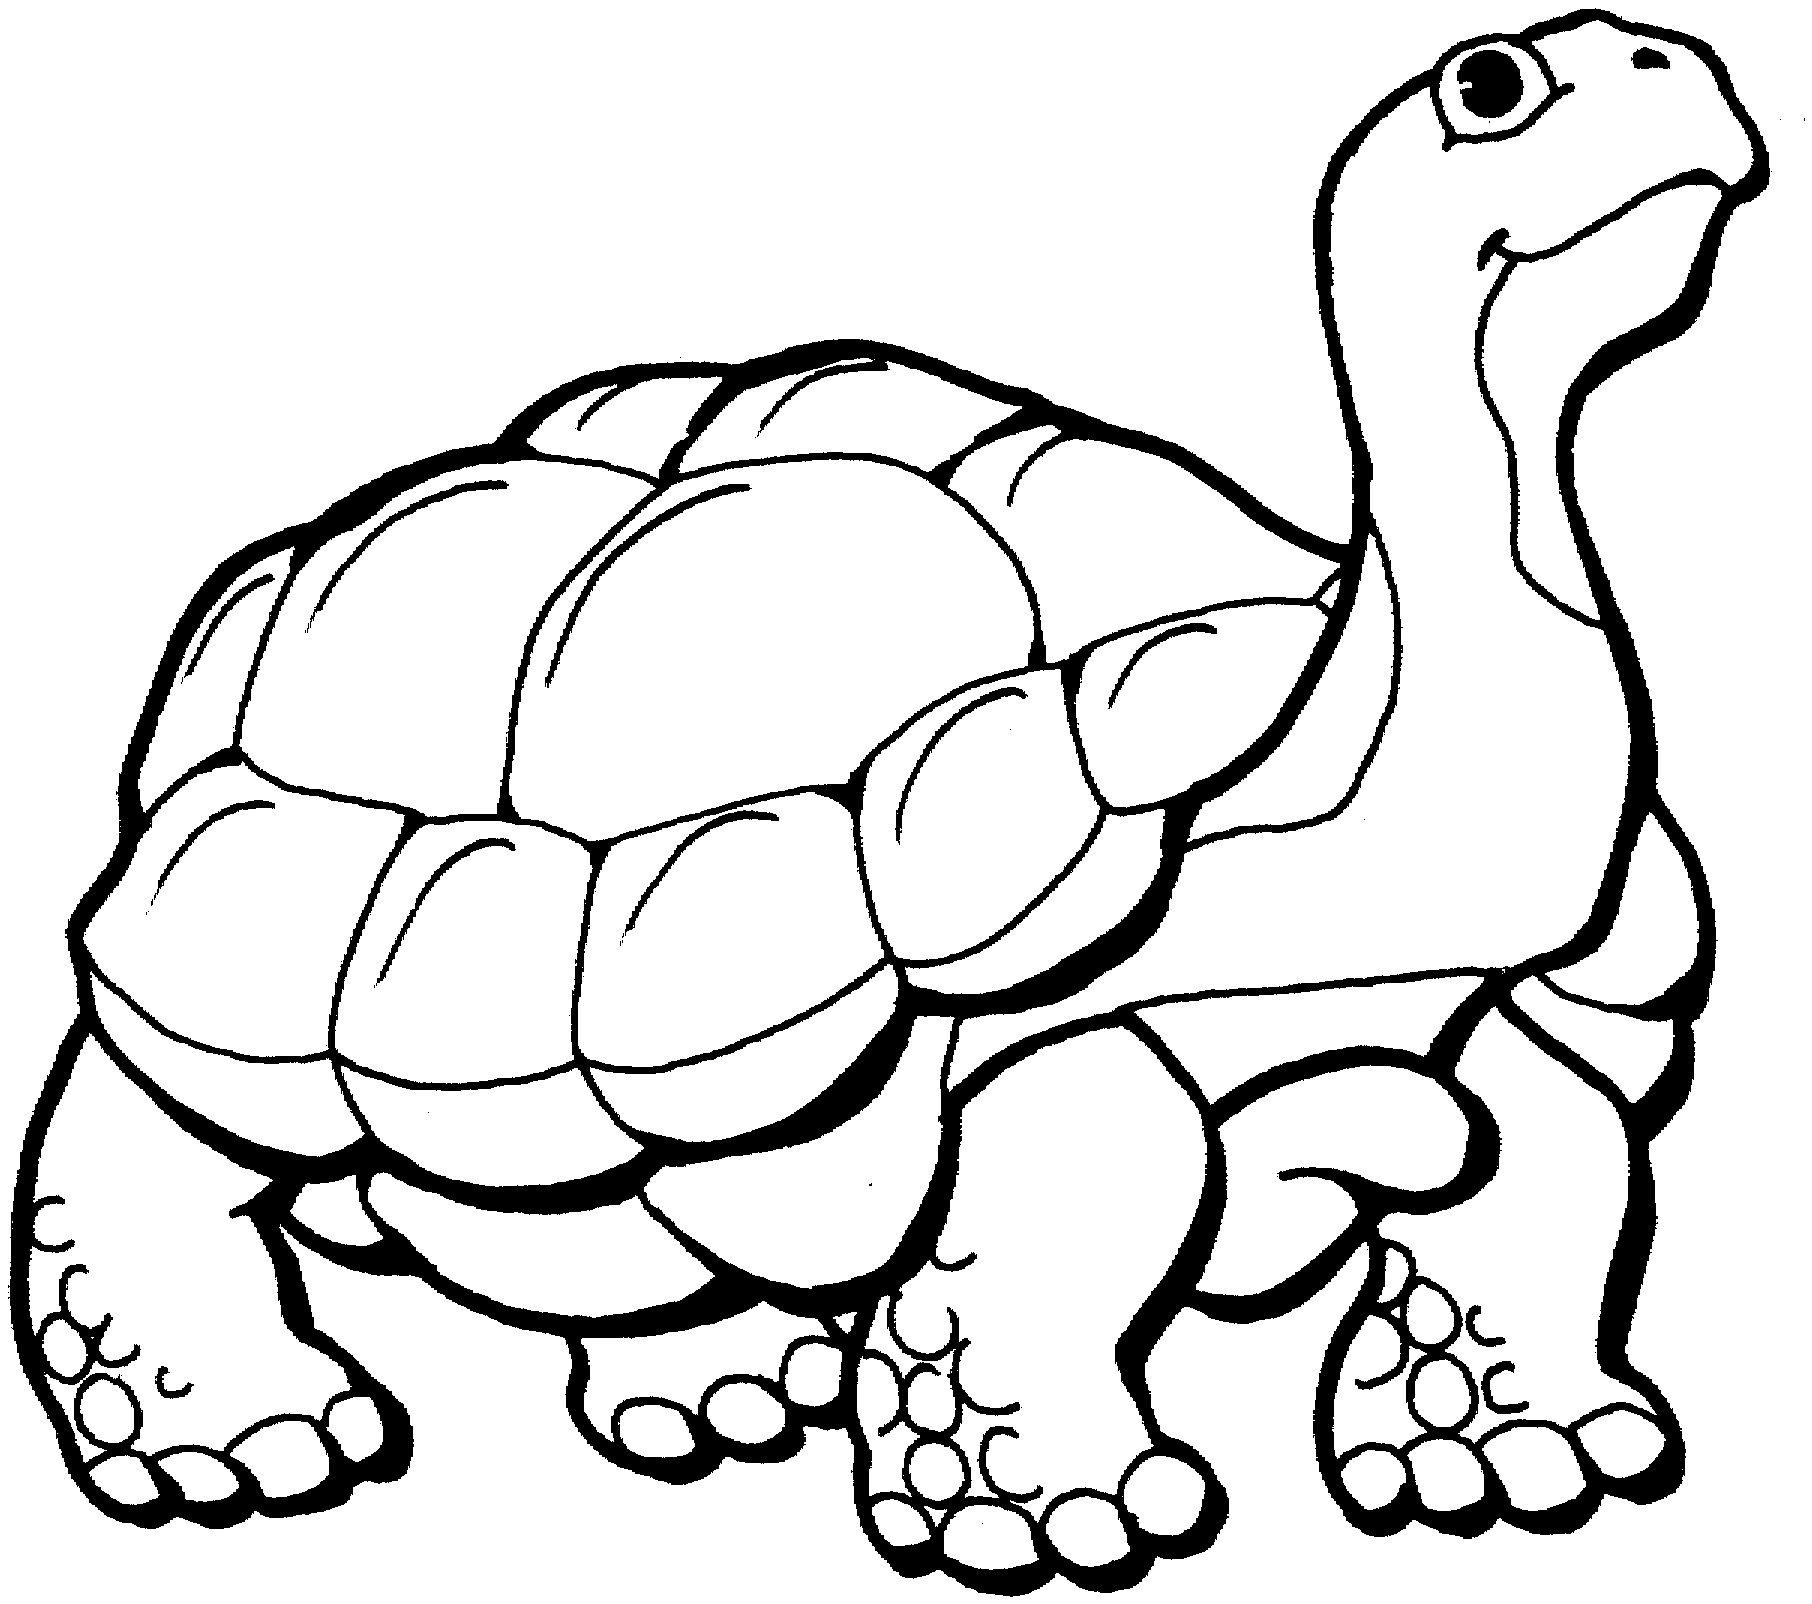 free turtle clipart black and white - photo #43